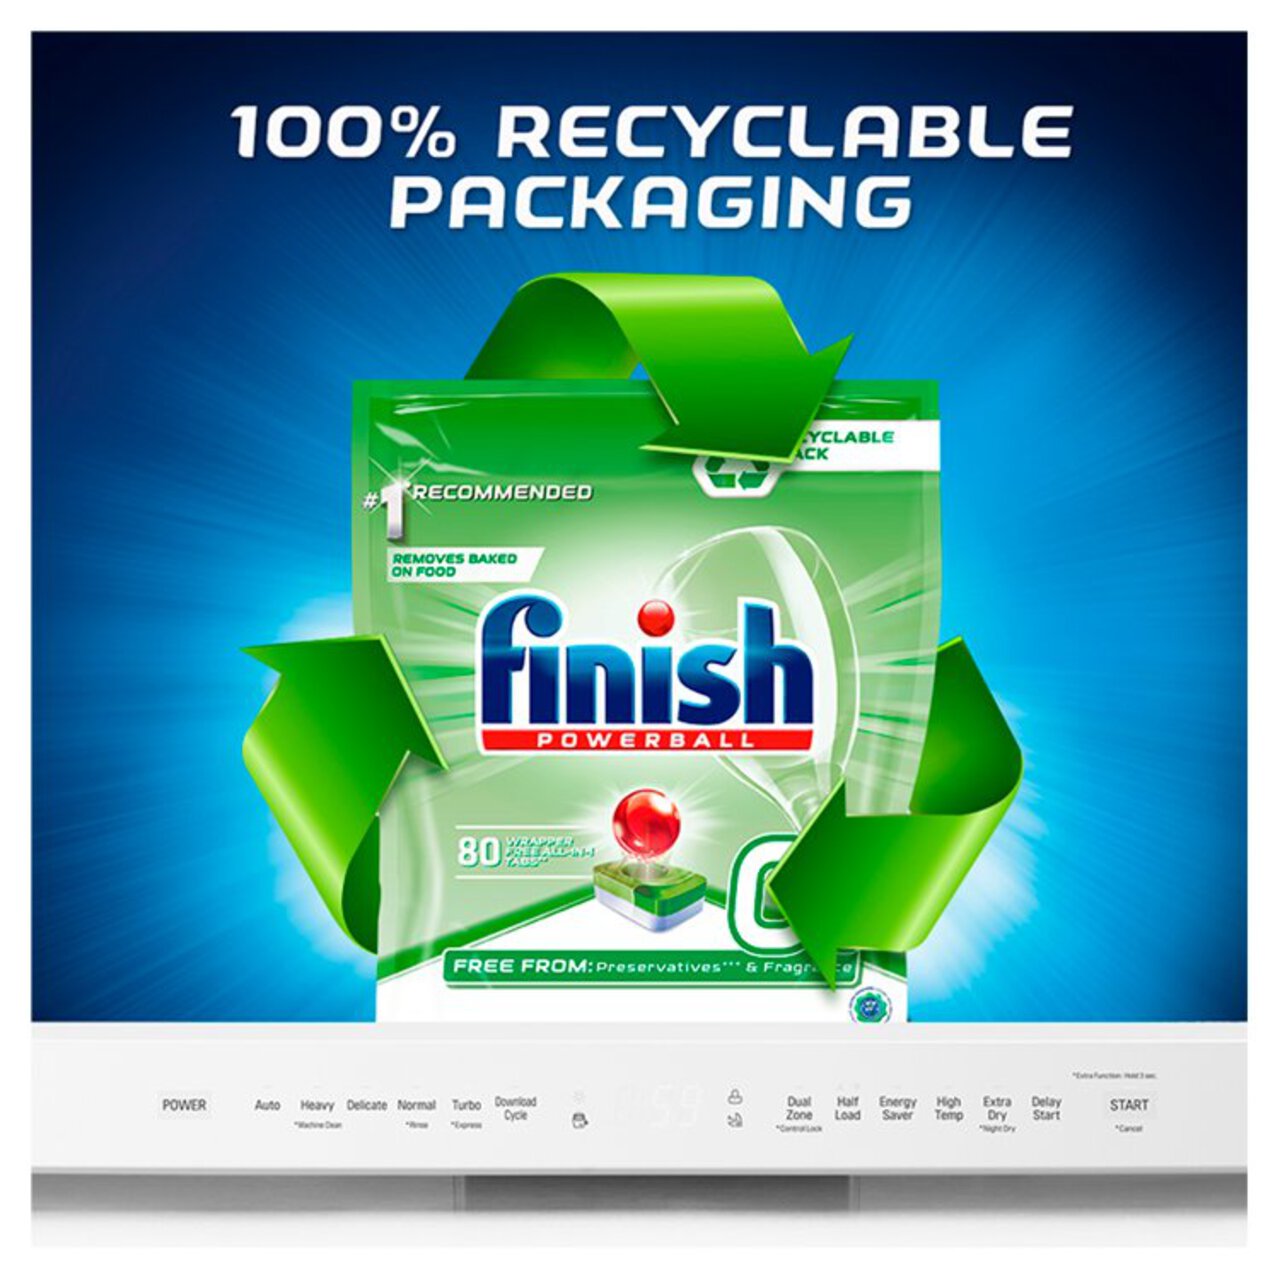 Finish Power 0% Recyclable Dishwasher Tablets 80 per pack